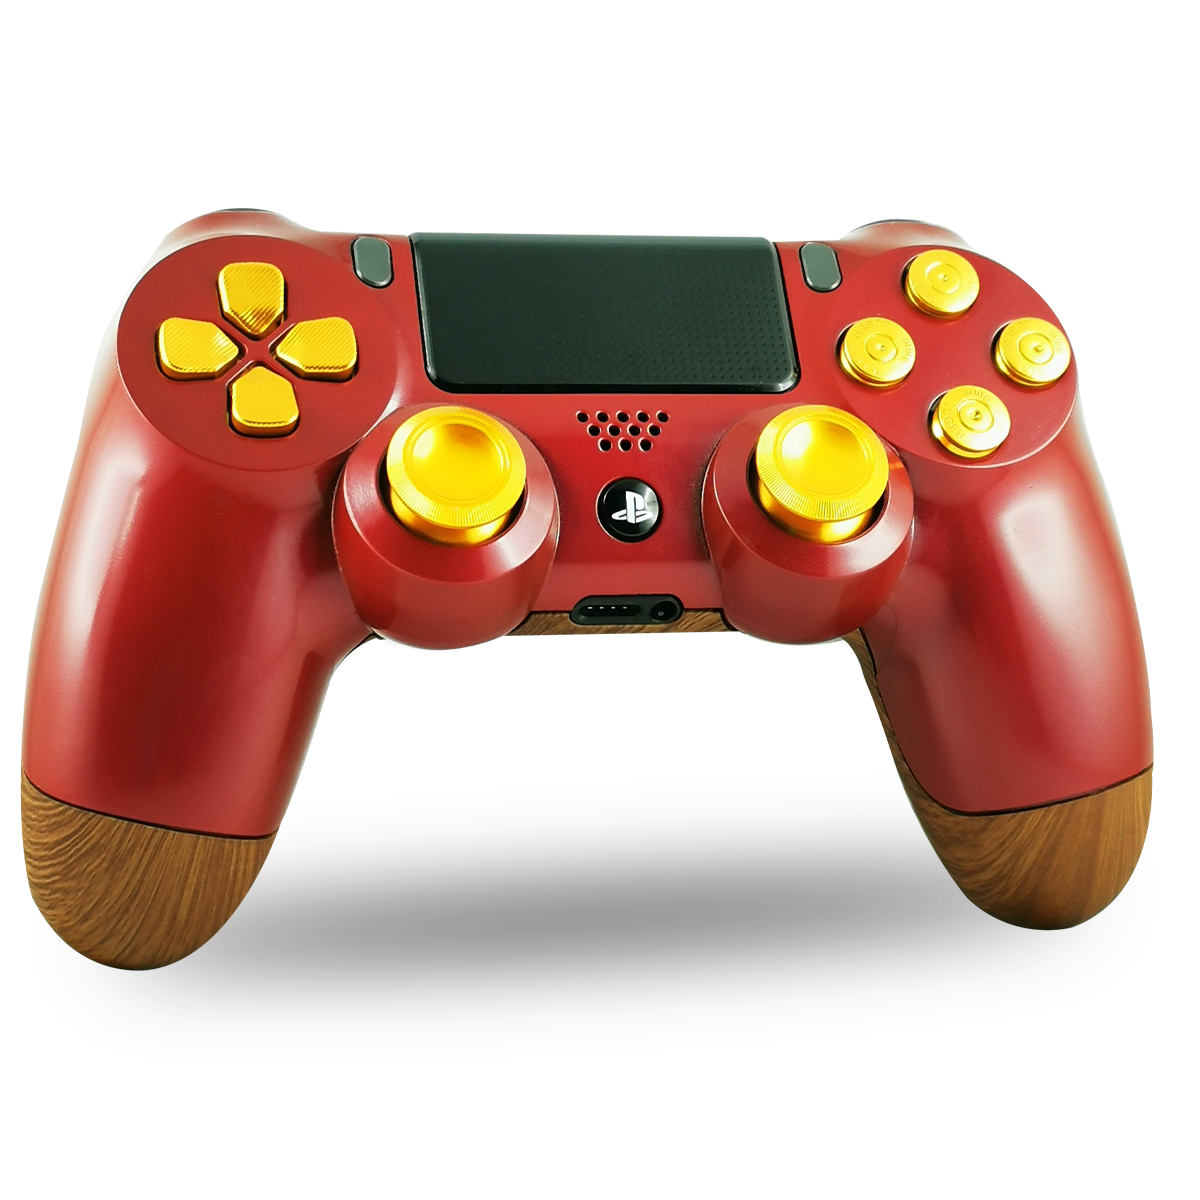 manette-PS4-custom-playstation-4-sony-personnalisee-drawmypad-inconnu12